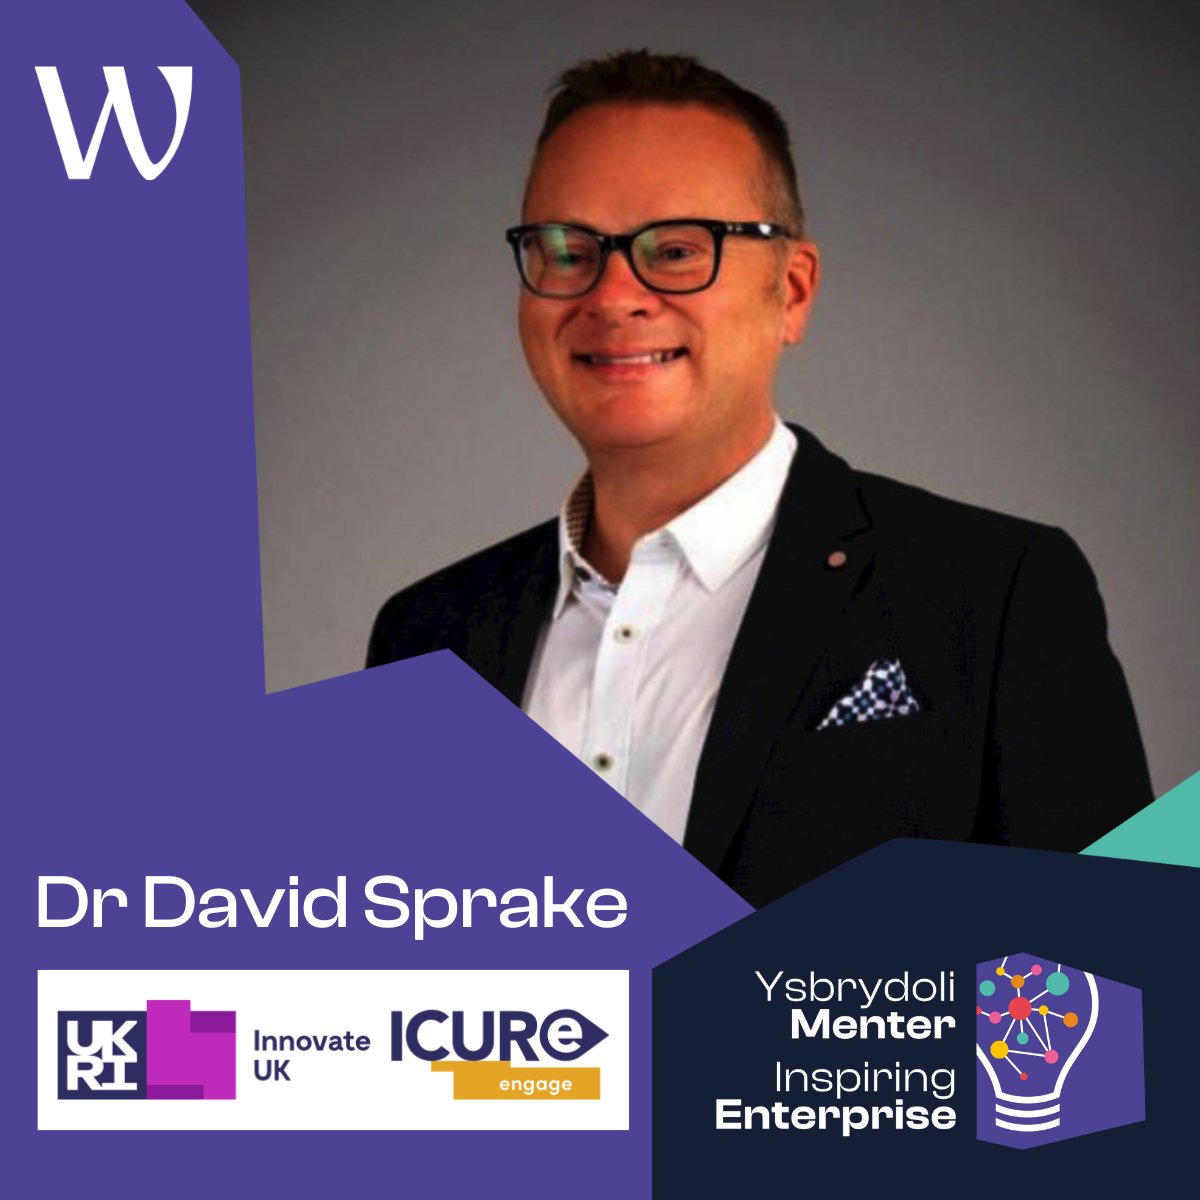 Congratulations to Dr David Sprake on joining the @ICUReProgramme! David says, 'I’m delighted to be accepted onto the ICURe #Engage programme as it will help launch my #decarbonisation #research into real world industry applications”.  

@WrexhamUni @innovateuk